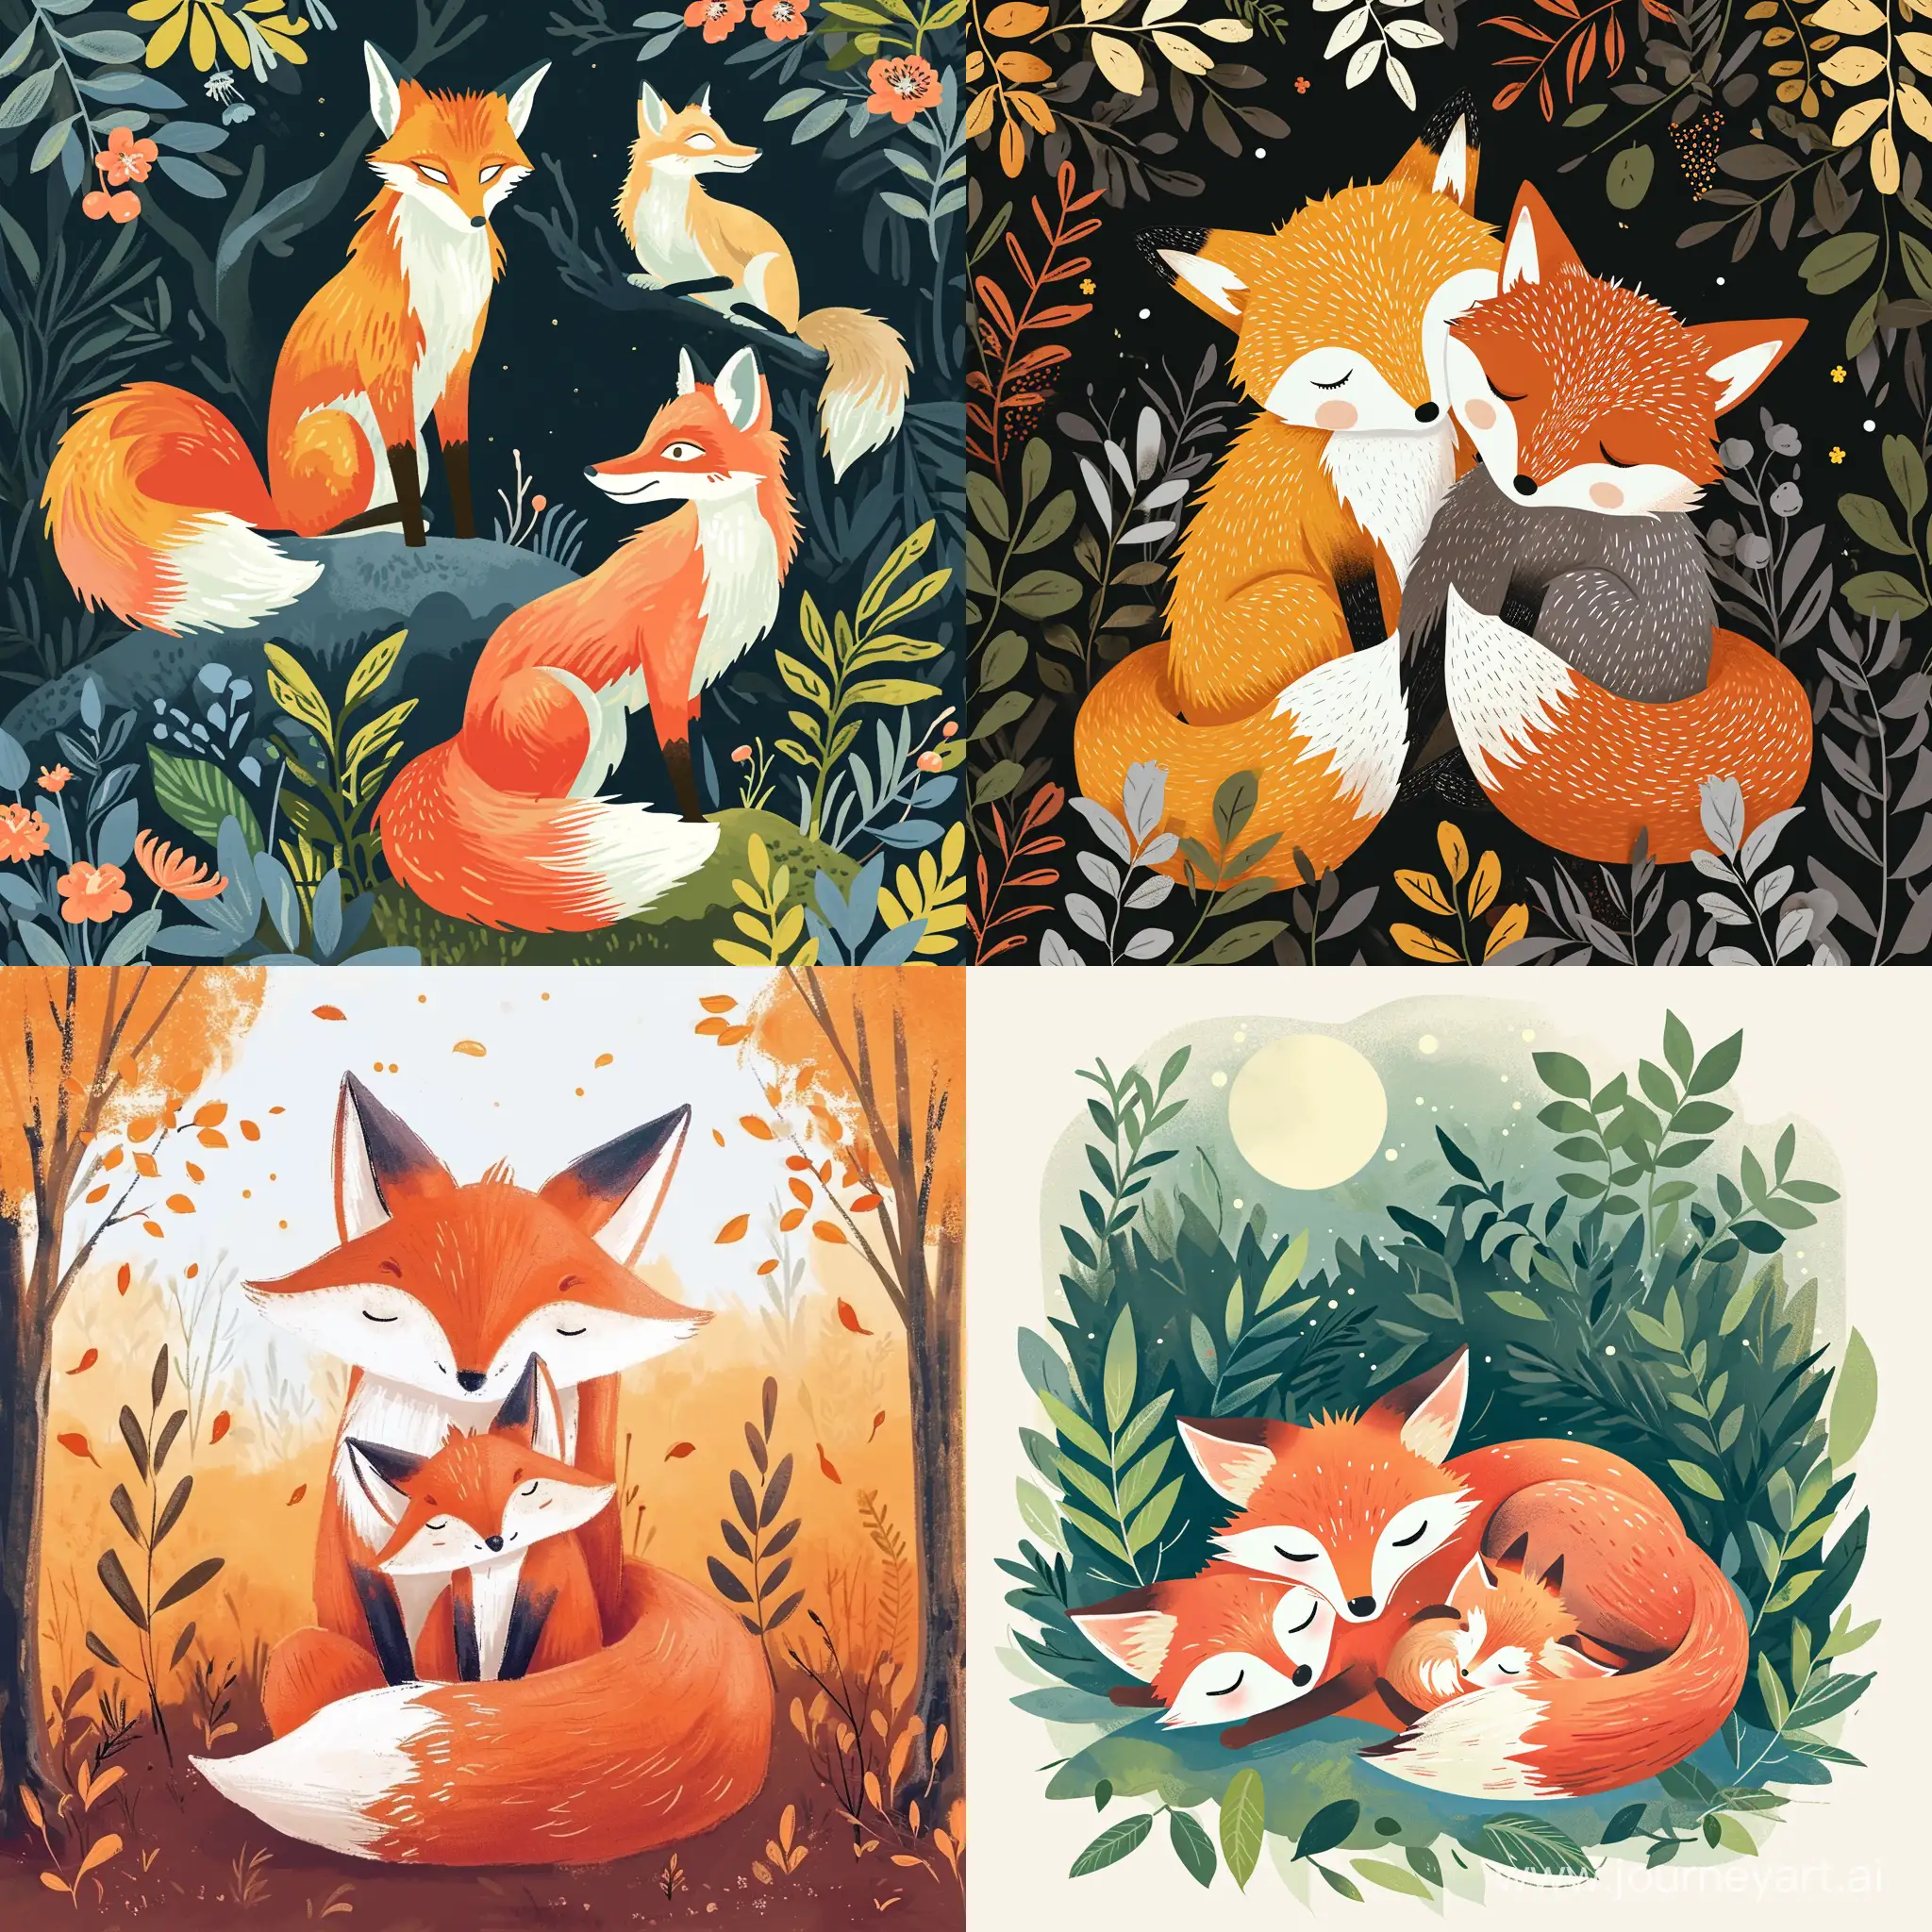 Card with foxes
in the style of anime by Miyazaki